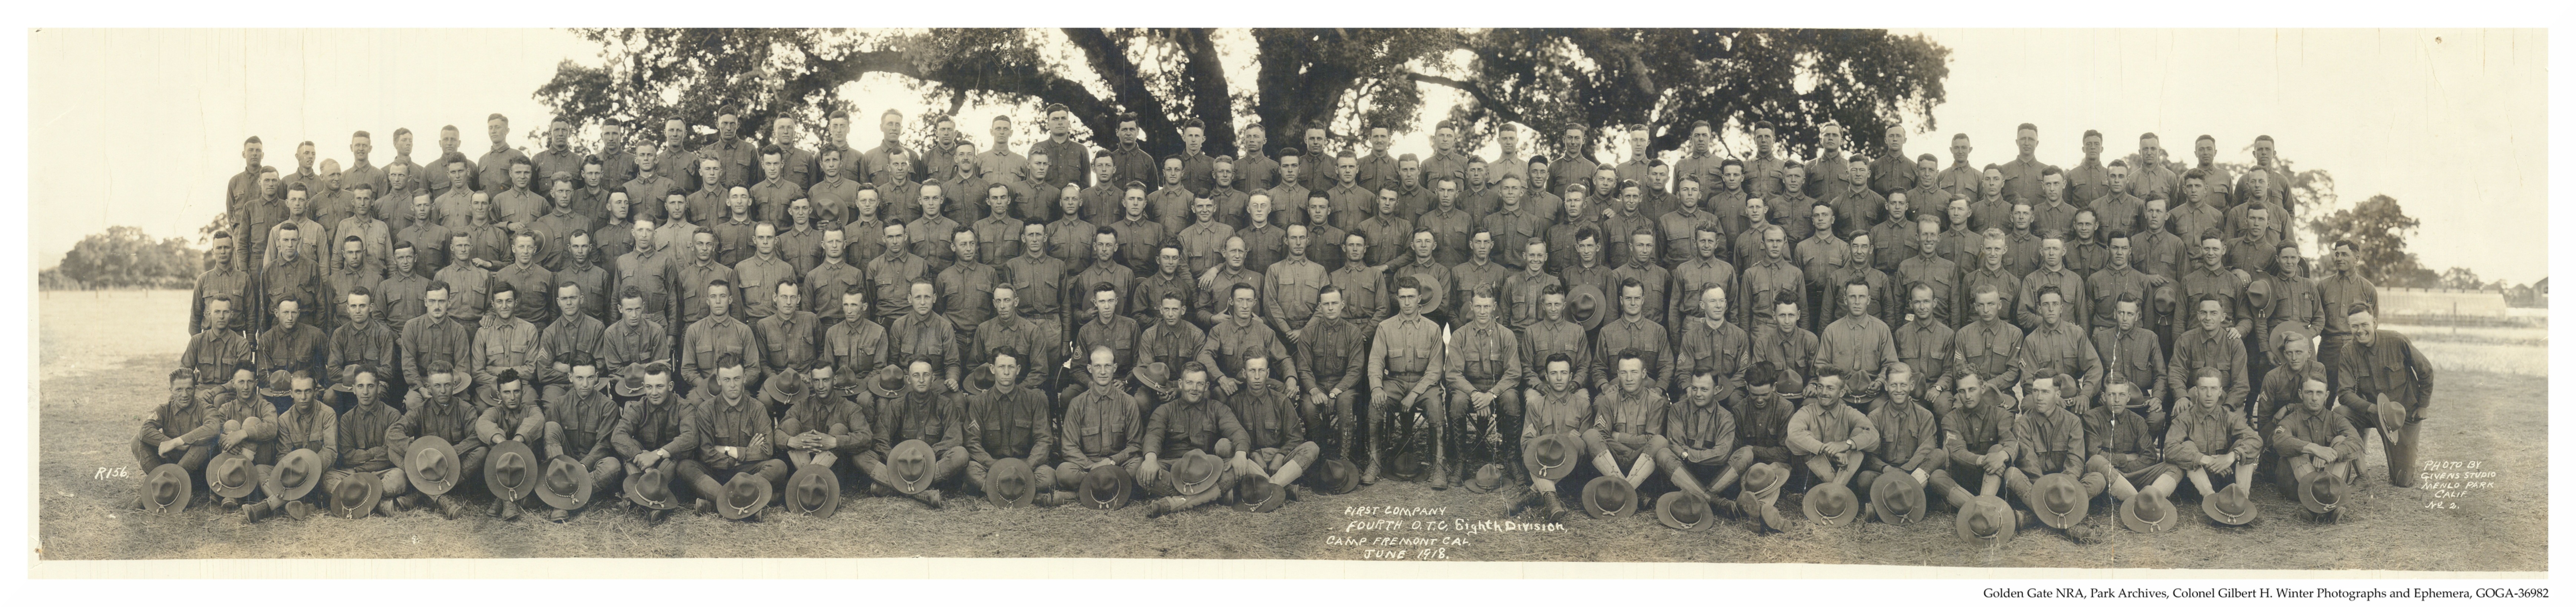 1st company 4th officers training corps 8th division with their hats off in Camp Freemont California in 1918 